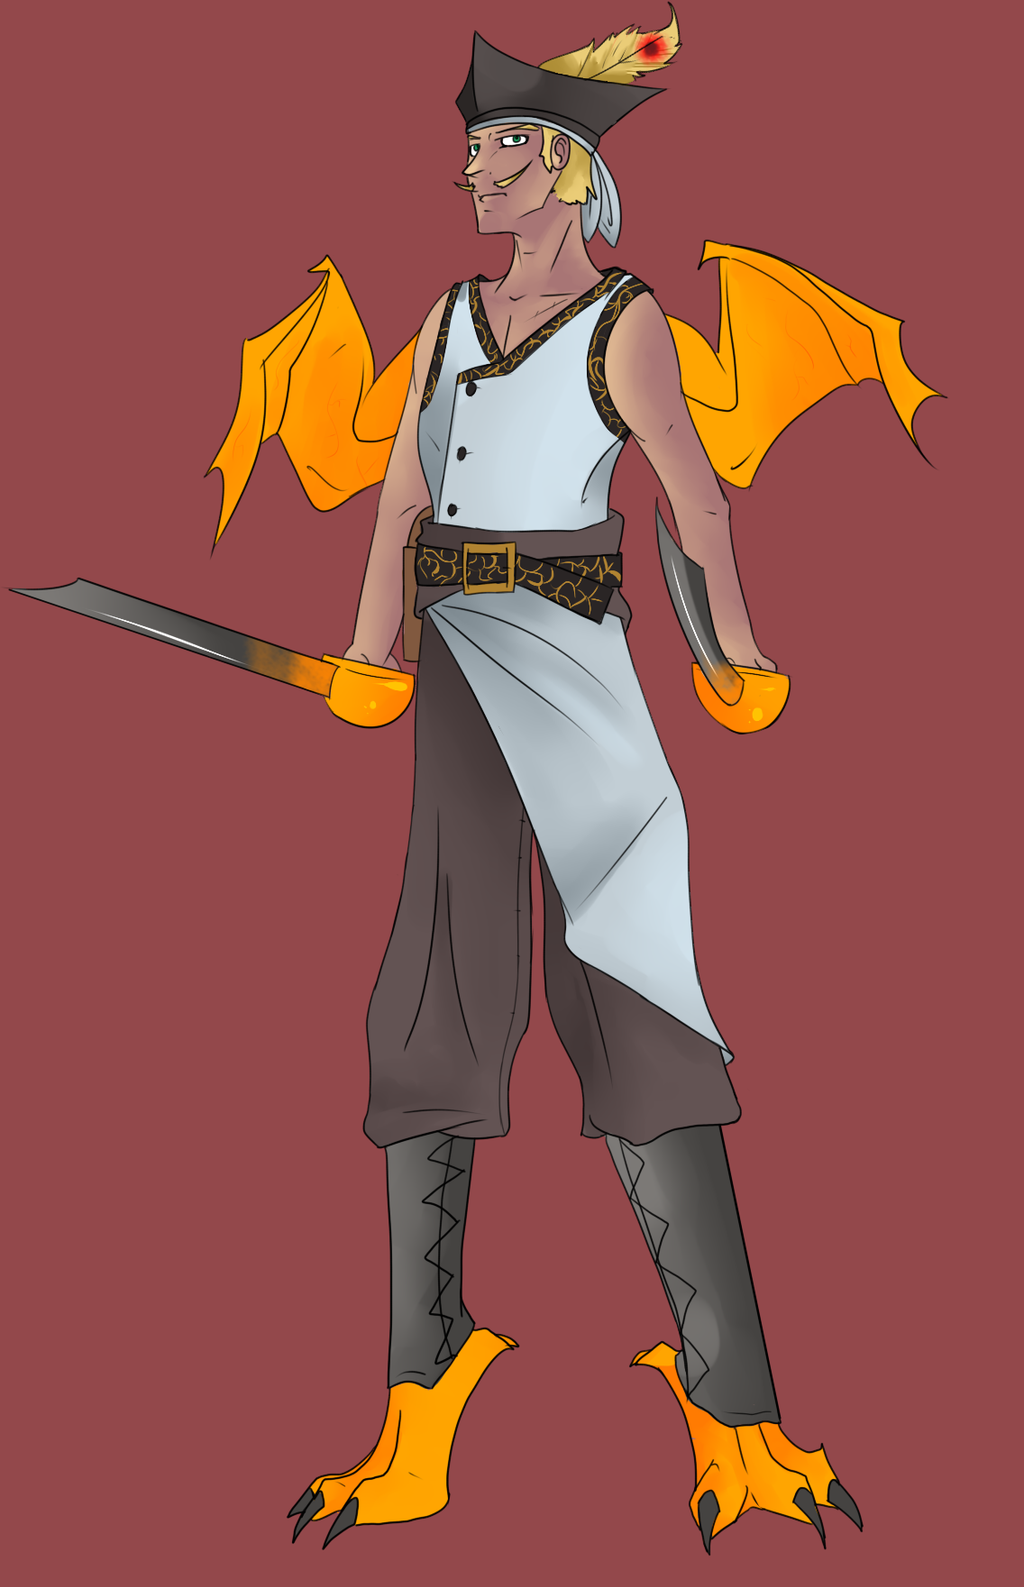 pirate_by_hailo95100-d5lup61.png